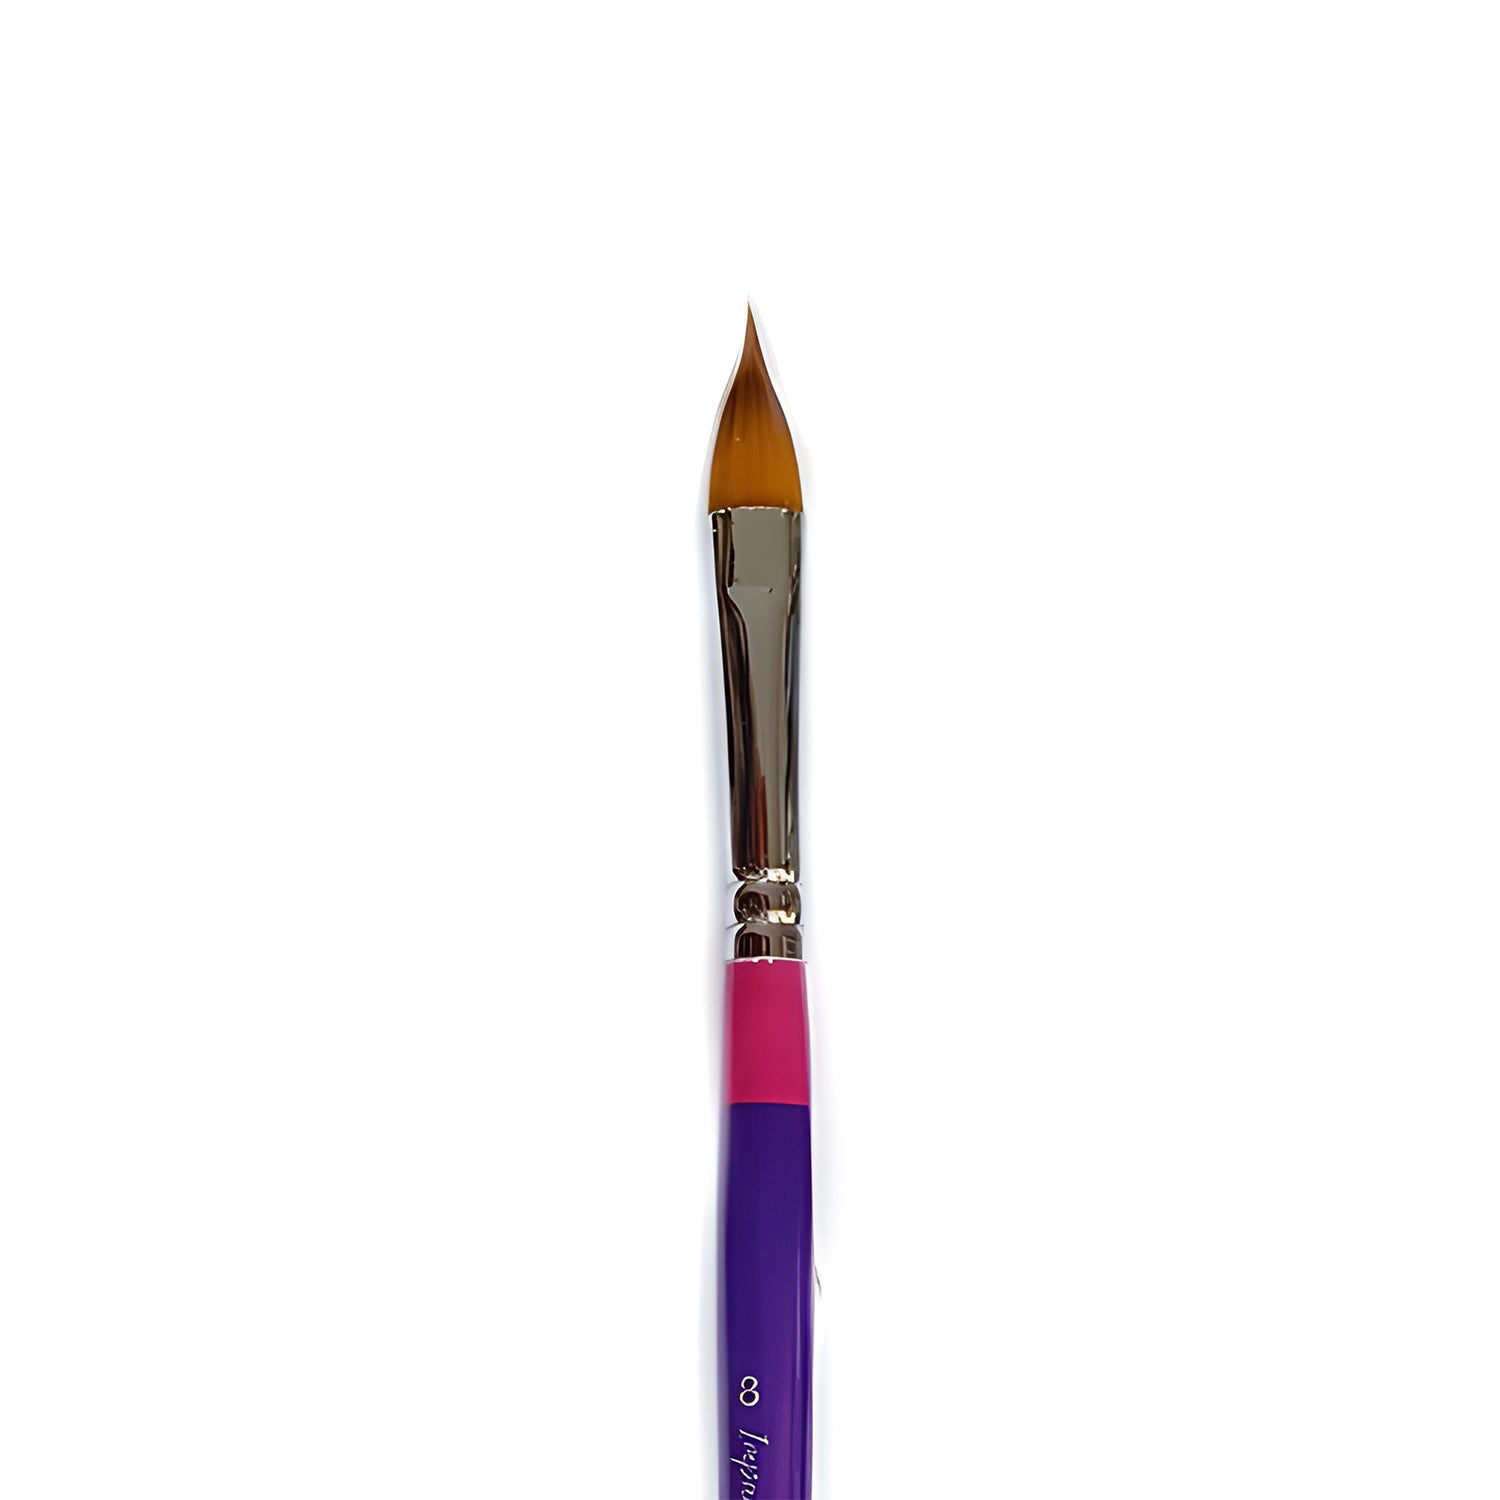 Impact Face Painting Brush - Bloom 810 #8